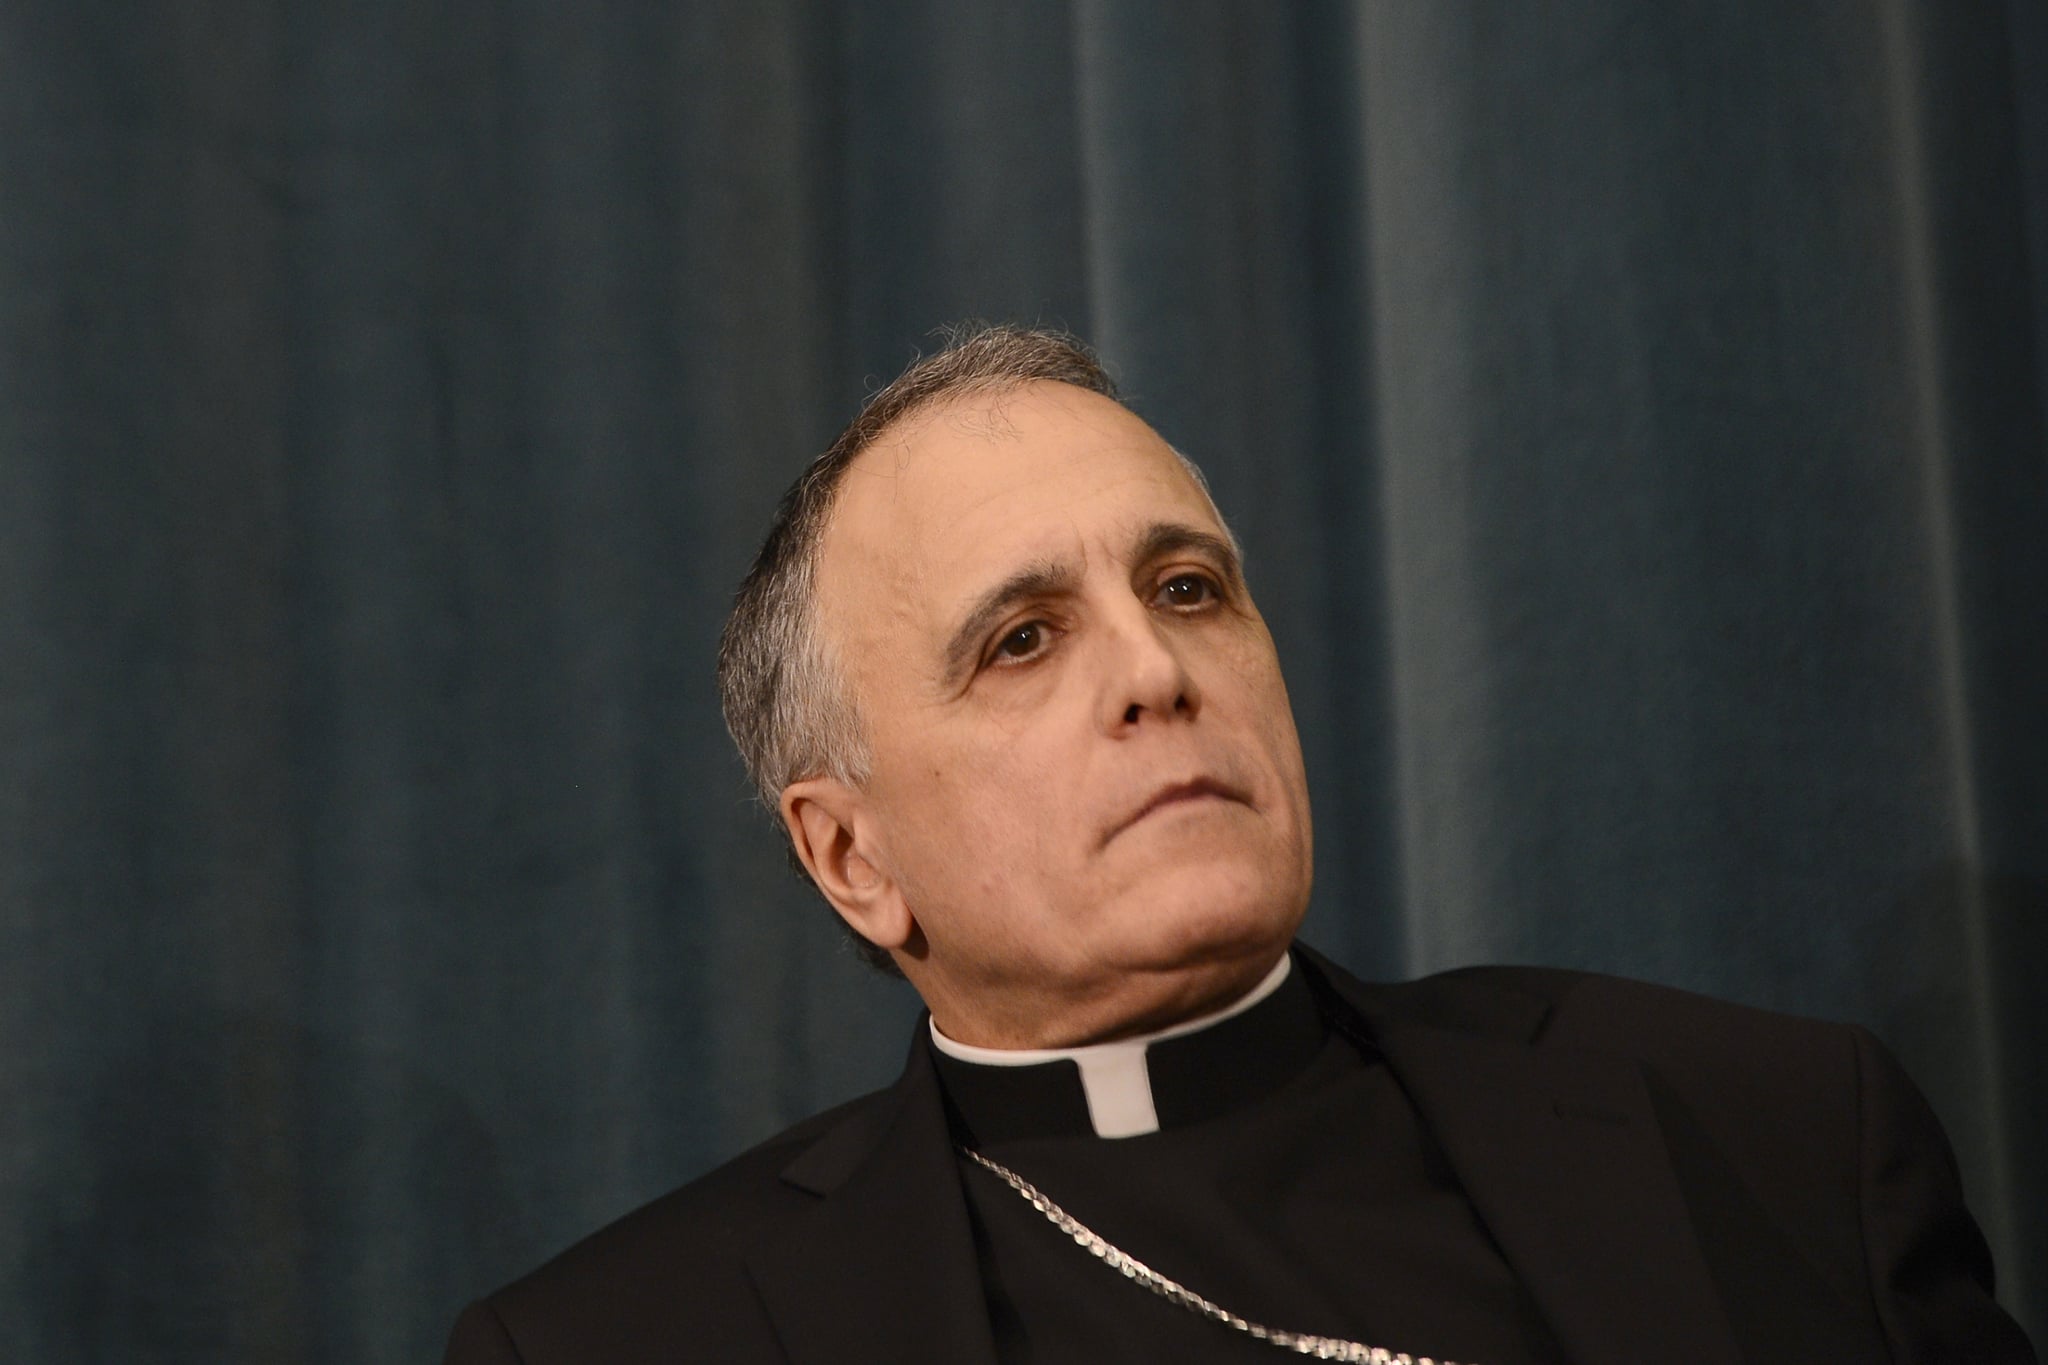 US cardinal Daniel DiNardo listens during a press conference at the North American College on March 5, 2013 in Rome. The Vatican said Tuesday that the date for the conclave to elect a new pope could be set before all cardinals have arrived in Rome, as five electors were still missing from the roll call.  AFP PHOTO / ANDREAS SOLARO        (Photo credit should read ANDREAS SOLARO,ANDREAS SOLARO/AFP/Getty Images)